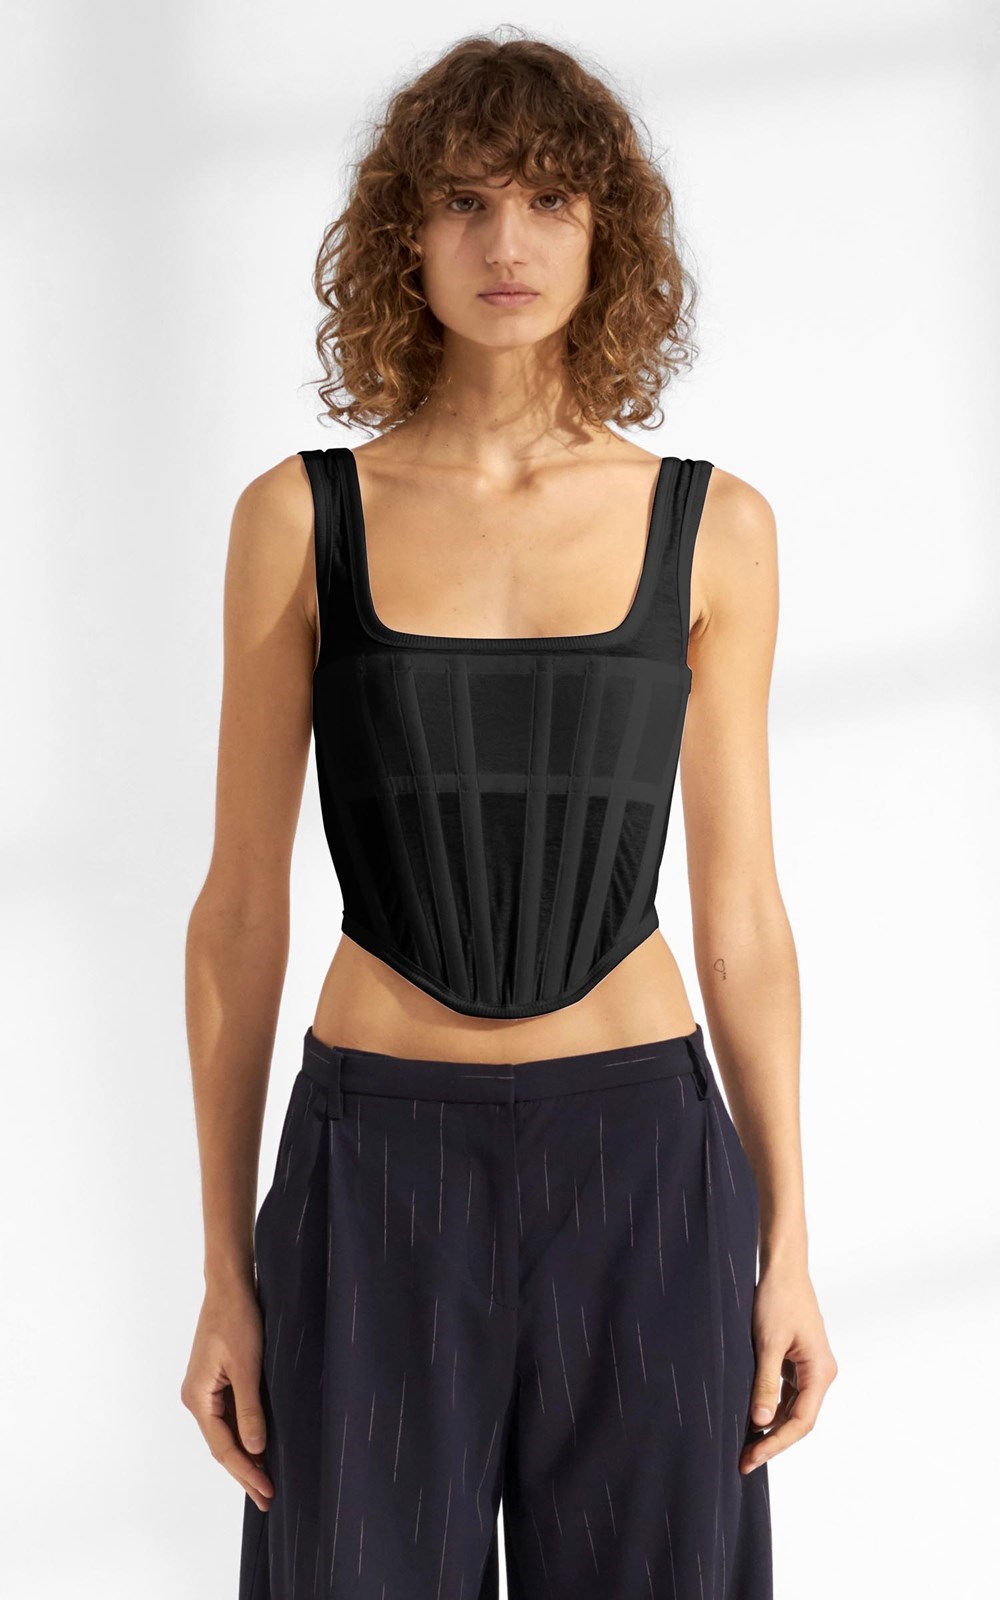 SHEER JERSEY CORSET by Dion Lee